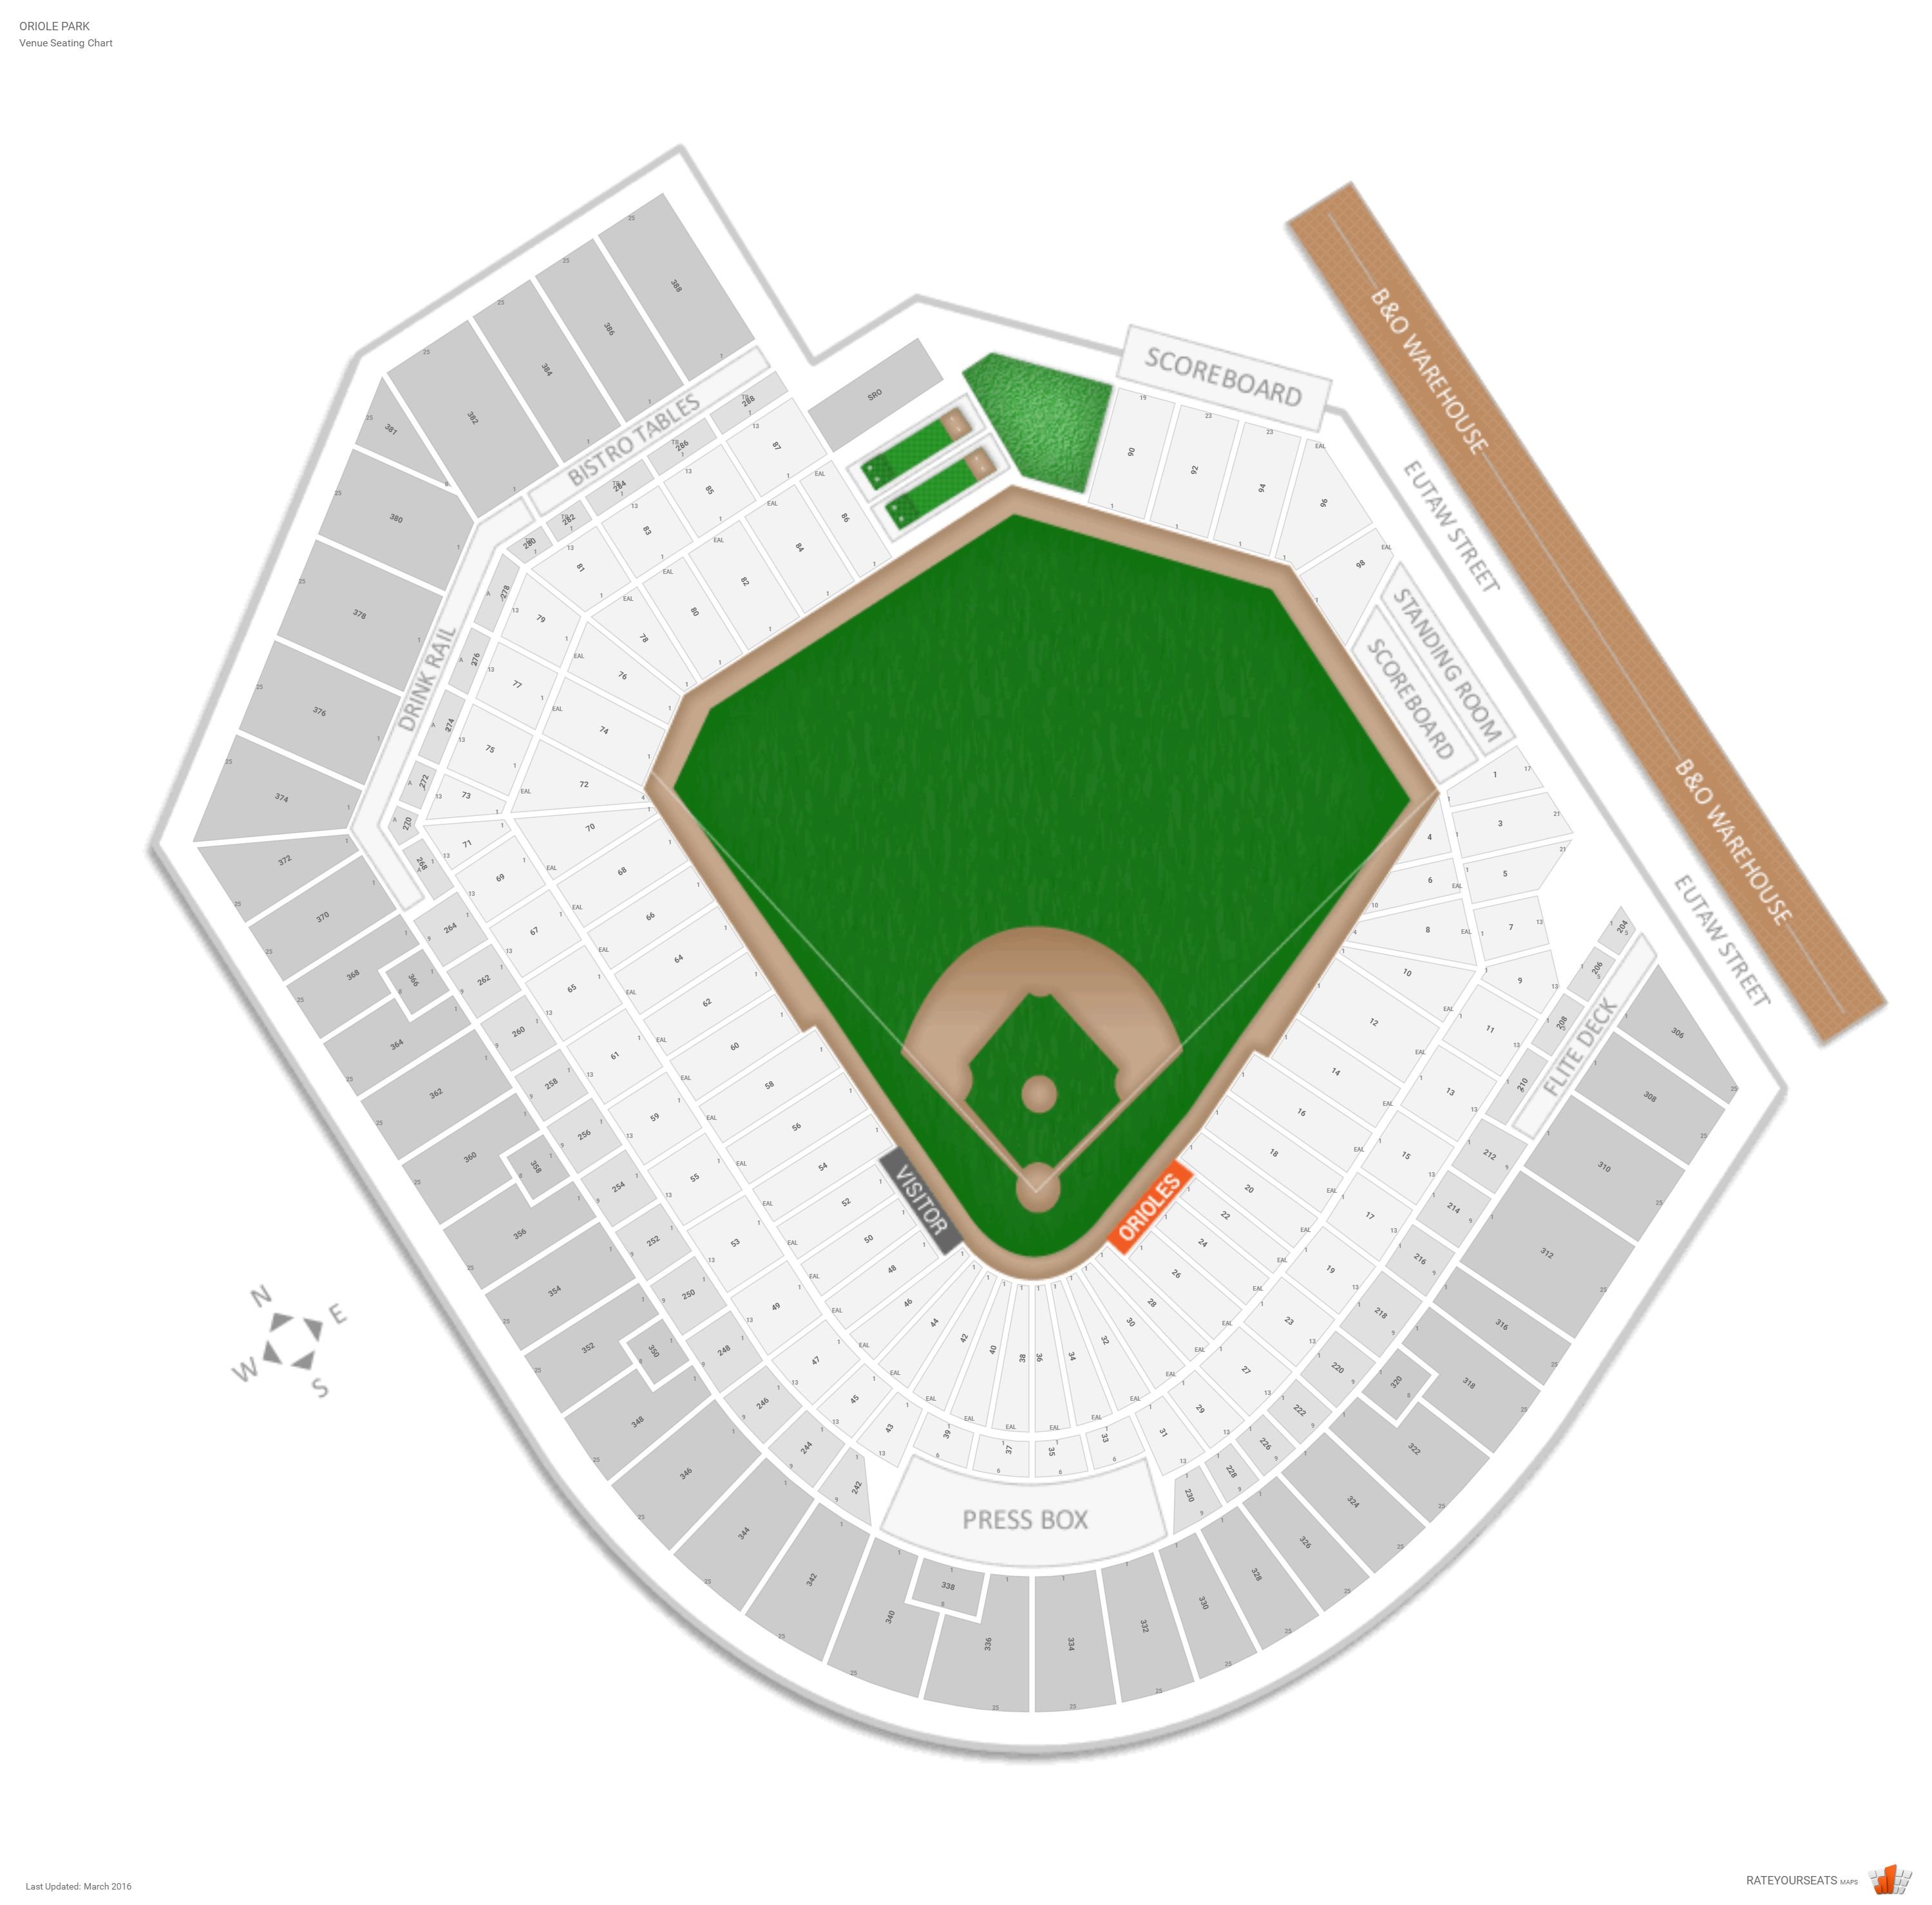 Orioles Seating Chart